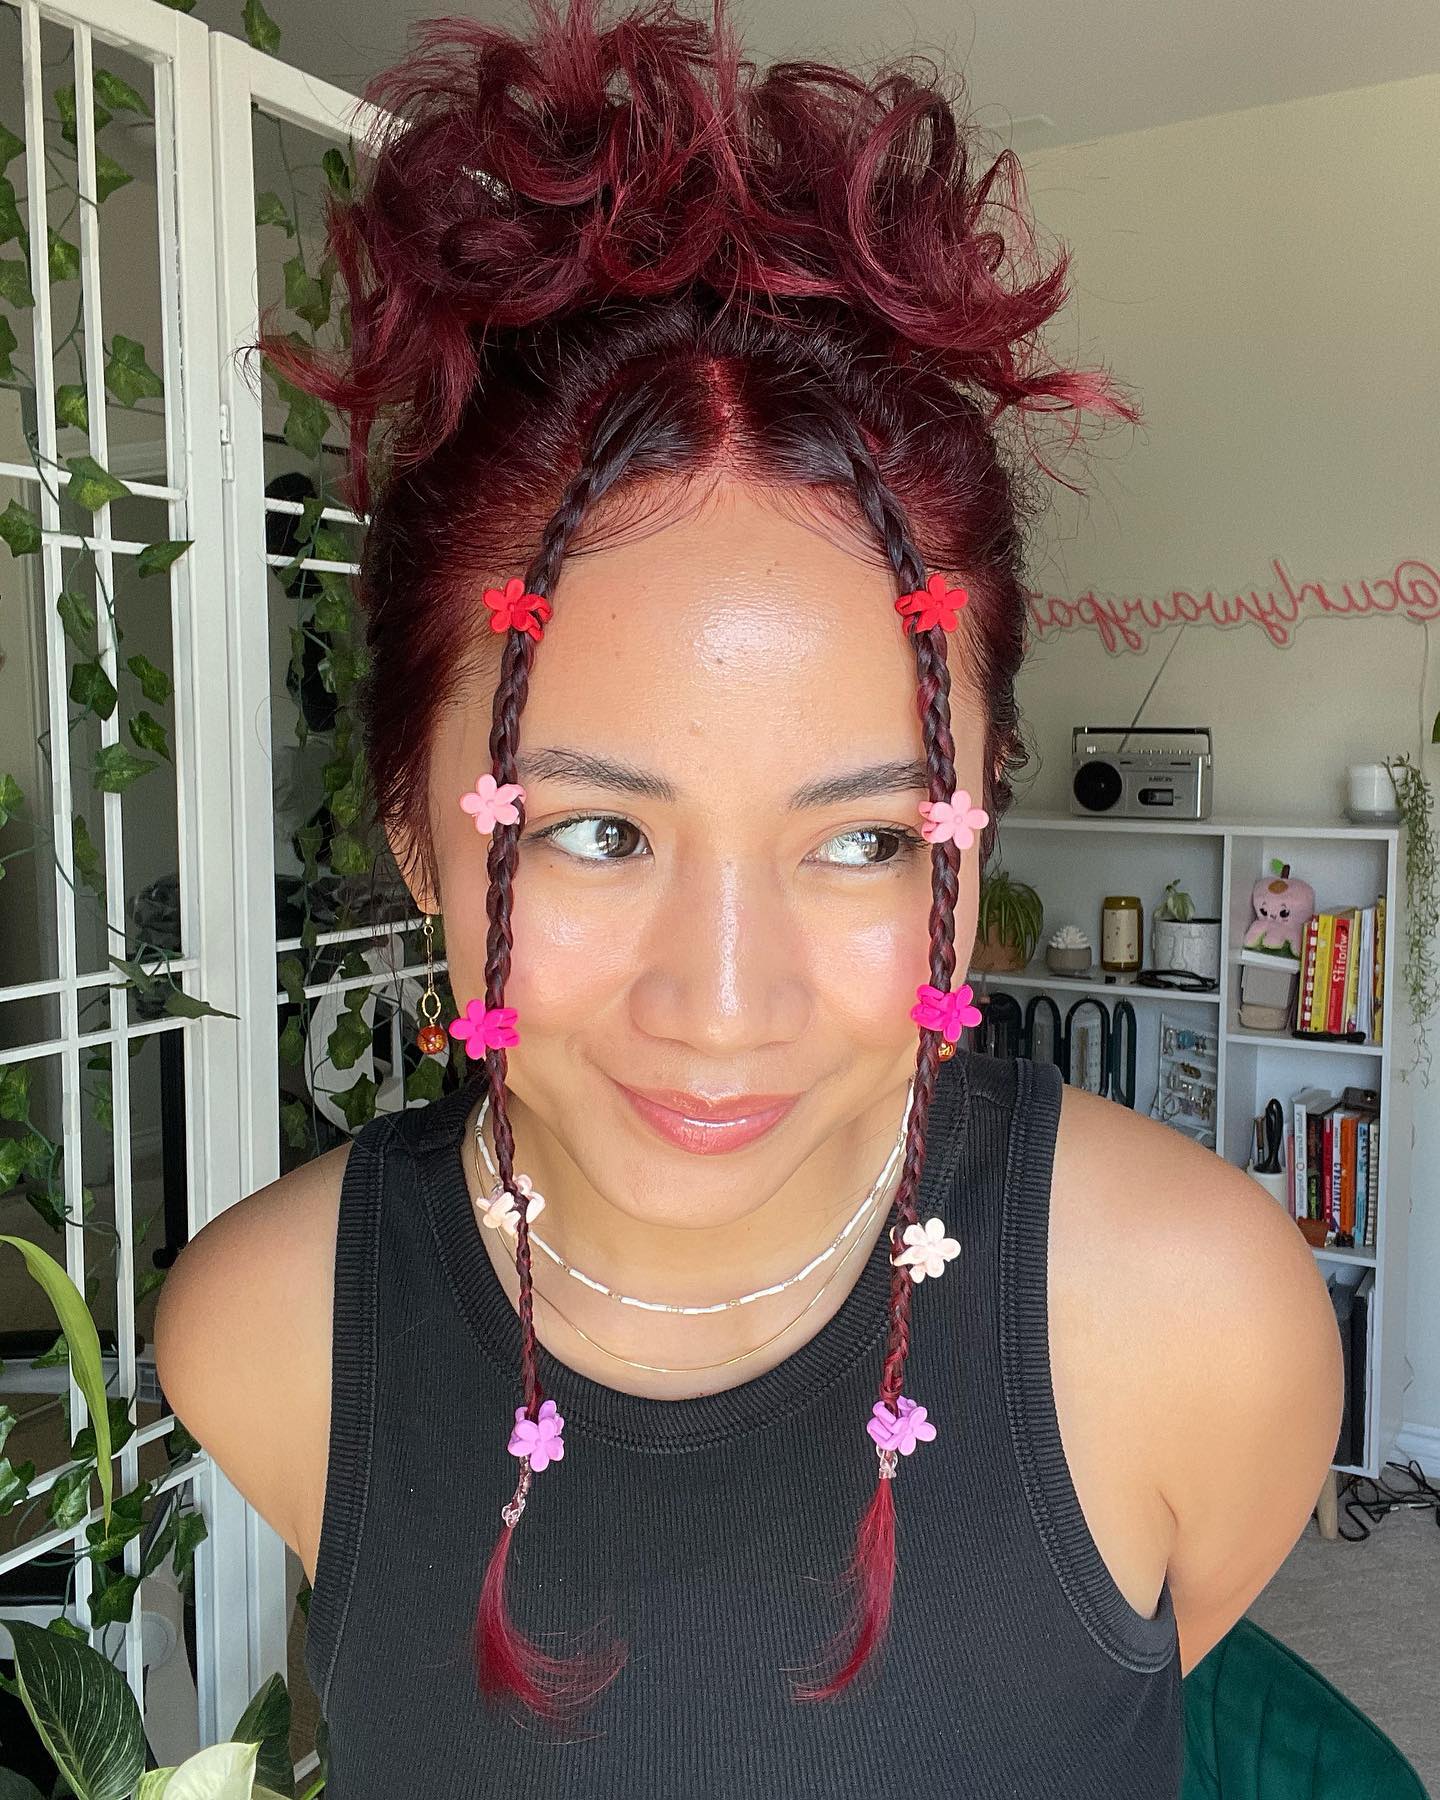 Festival Hairstyle Inspiration for Curly Hair - My Curly Adventures | Festival  hair, Curly hair styles, Braids for short hair